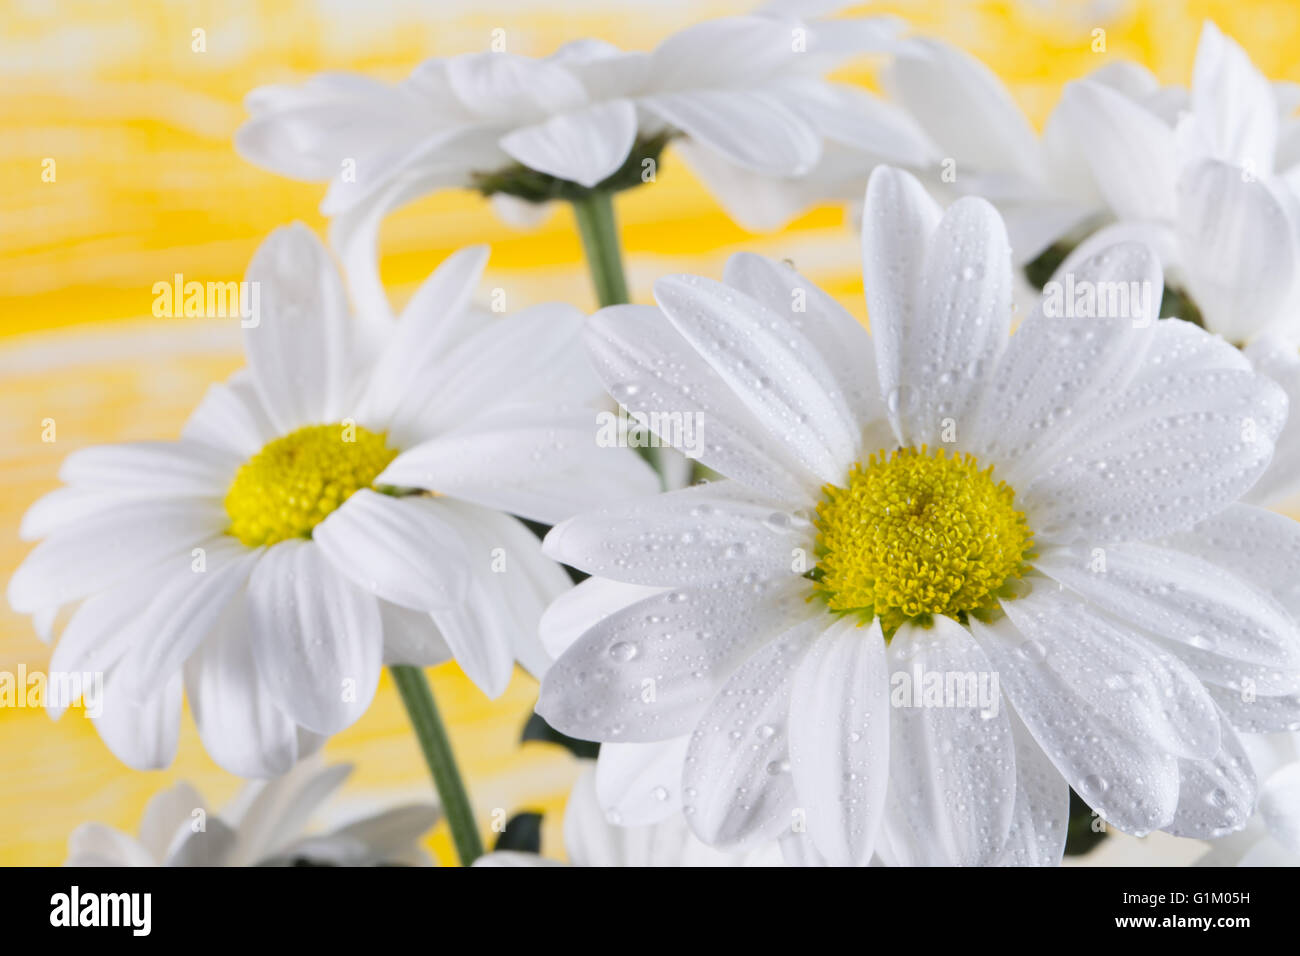 bouquet of daisies on the yellow background. Stock Photo